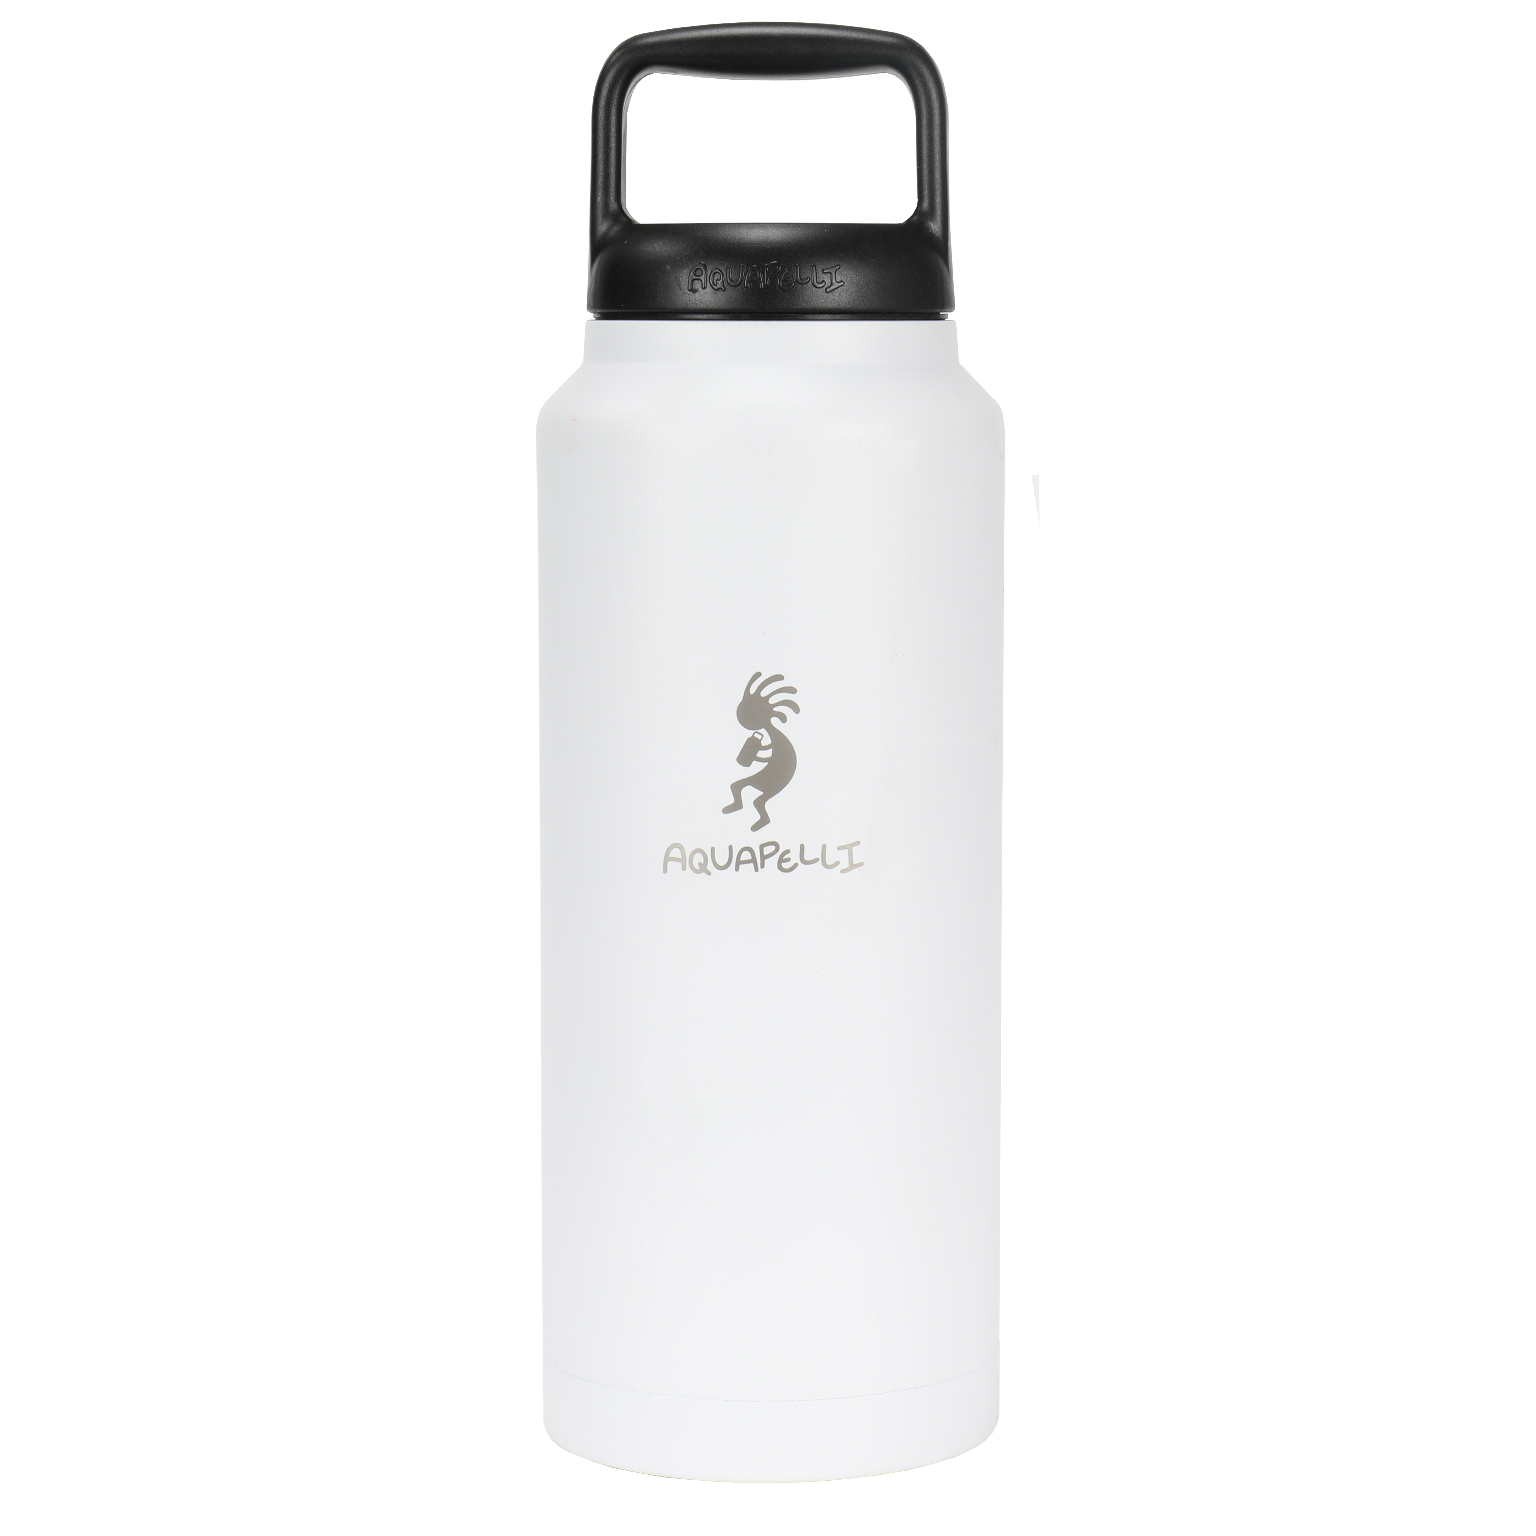 Vacuum Insulated Water Bottle - 34 oz, White